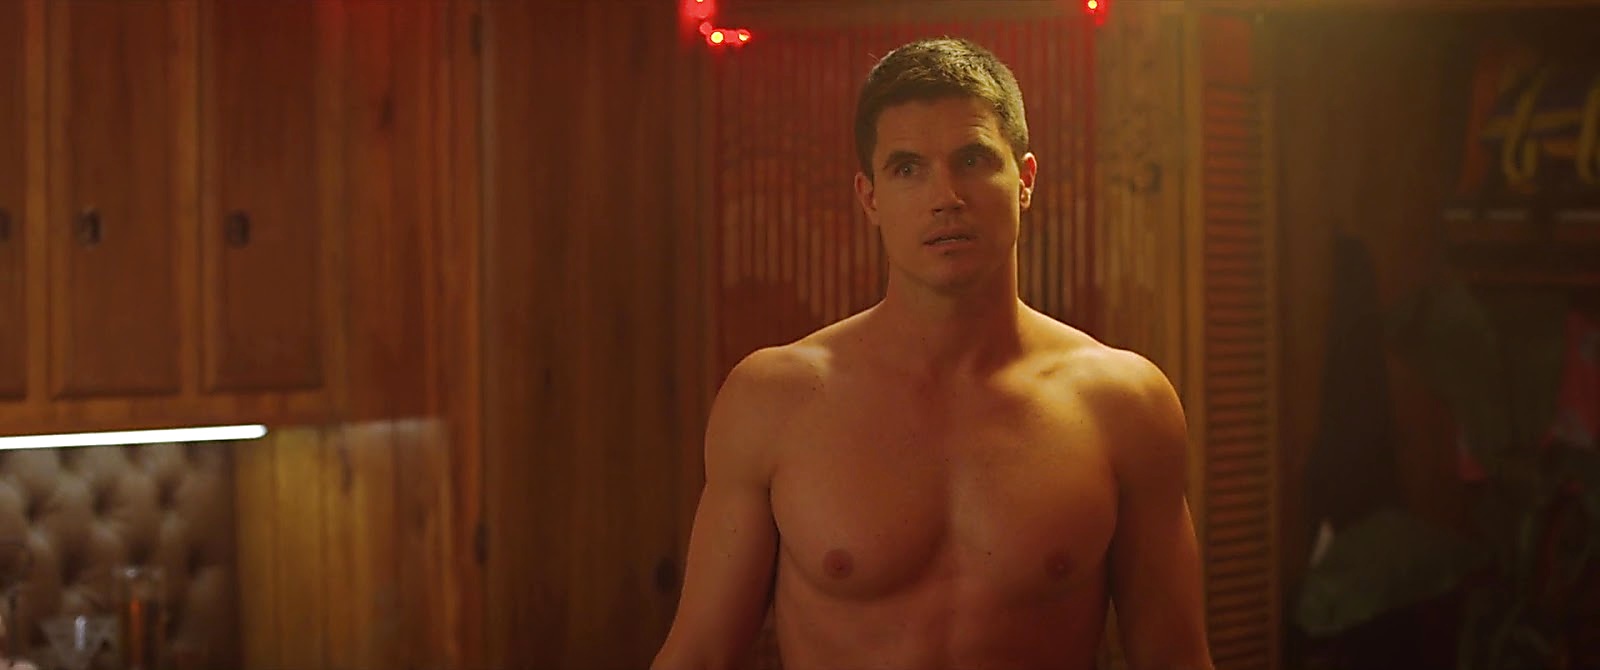 Robbie Amell sexy shirtless scene September 10, 2020, 8am.